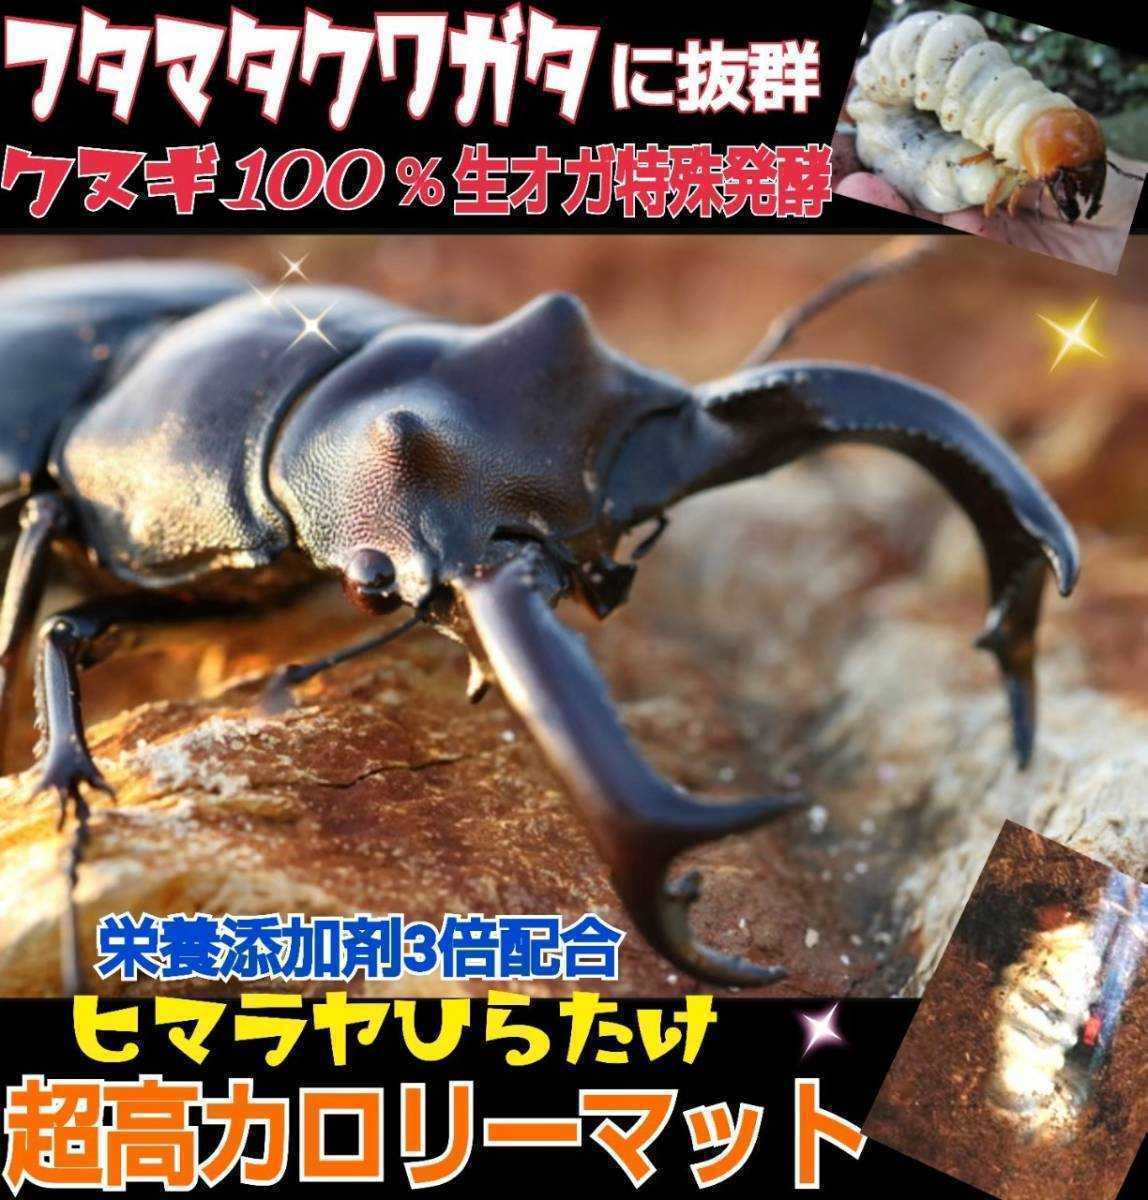  oo stag beetle exclusive use * super height calorie mat! sawtooth oak, raw oga special departure .! symbiosis bacteria, special amino acid etc. nutrition addition agent 3 times combination * ultimate special selection mat 